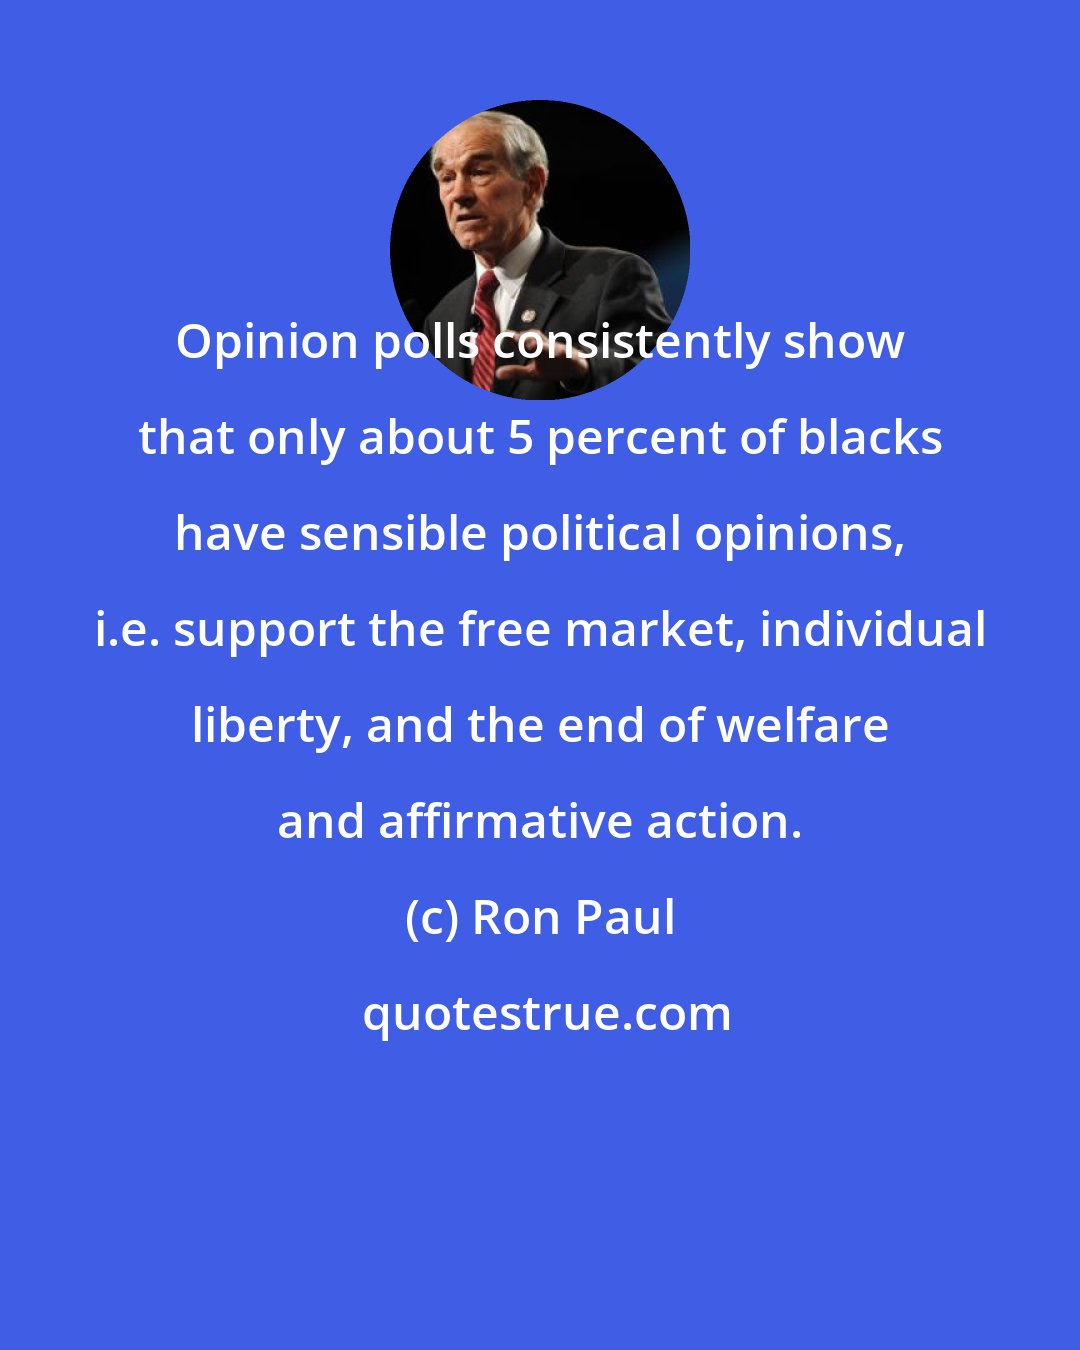 Ron Paul: Opinion polls consistently show that only about 5 percent of blacks have sensible political opinions, i.e. support the free market, individual liberty, and the end of welfare and affirmative action.